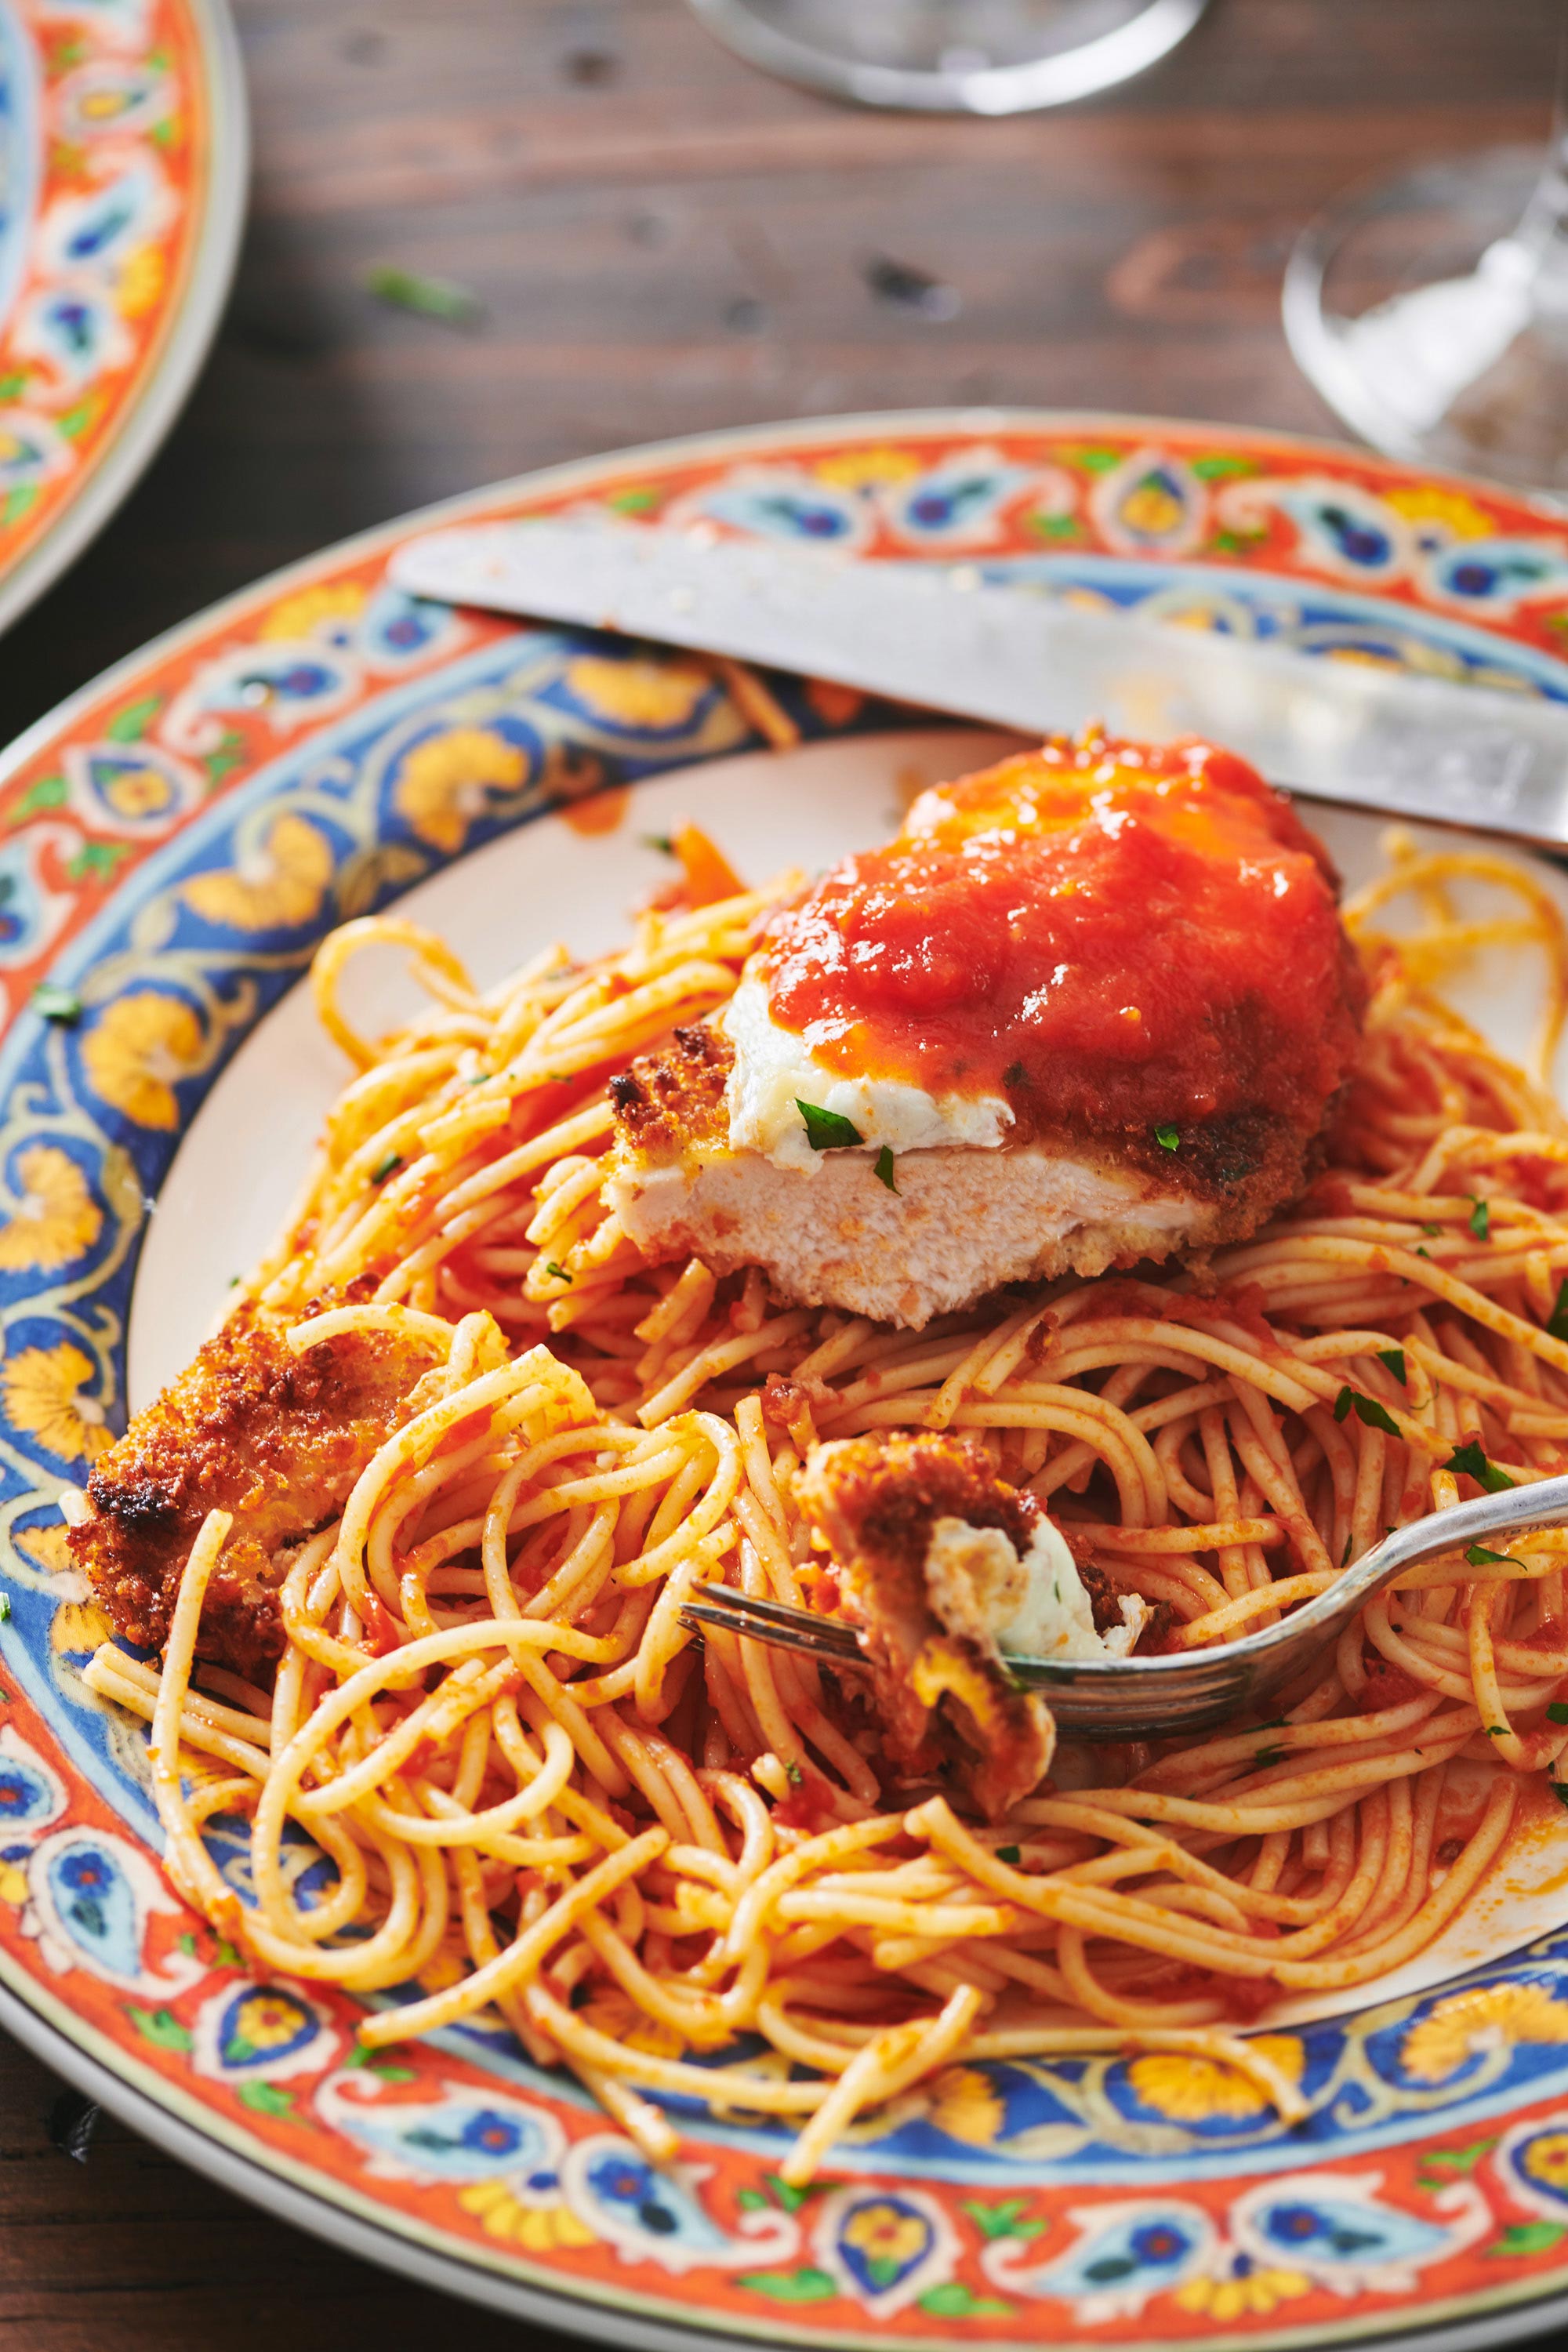 A piece of Chicken Parmigiana sliced with a fork on a plate with a colorful border.